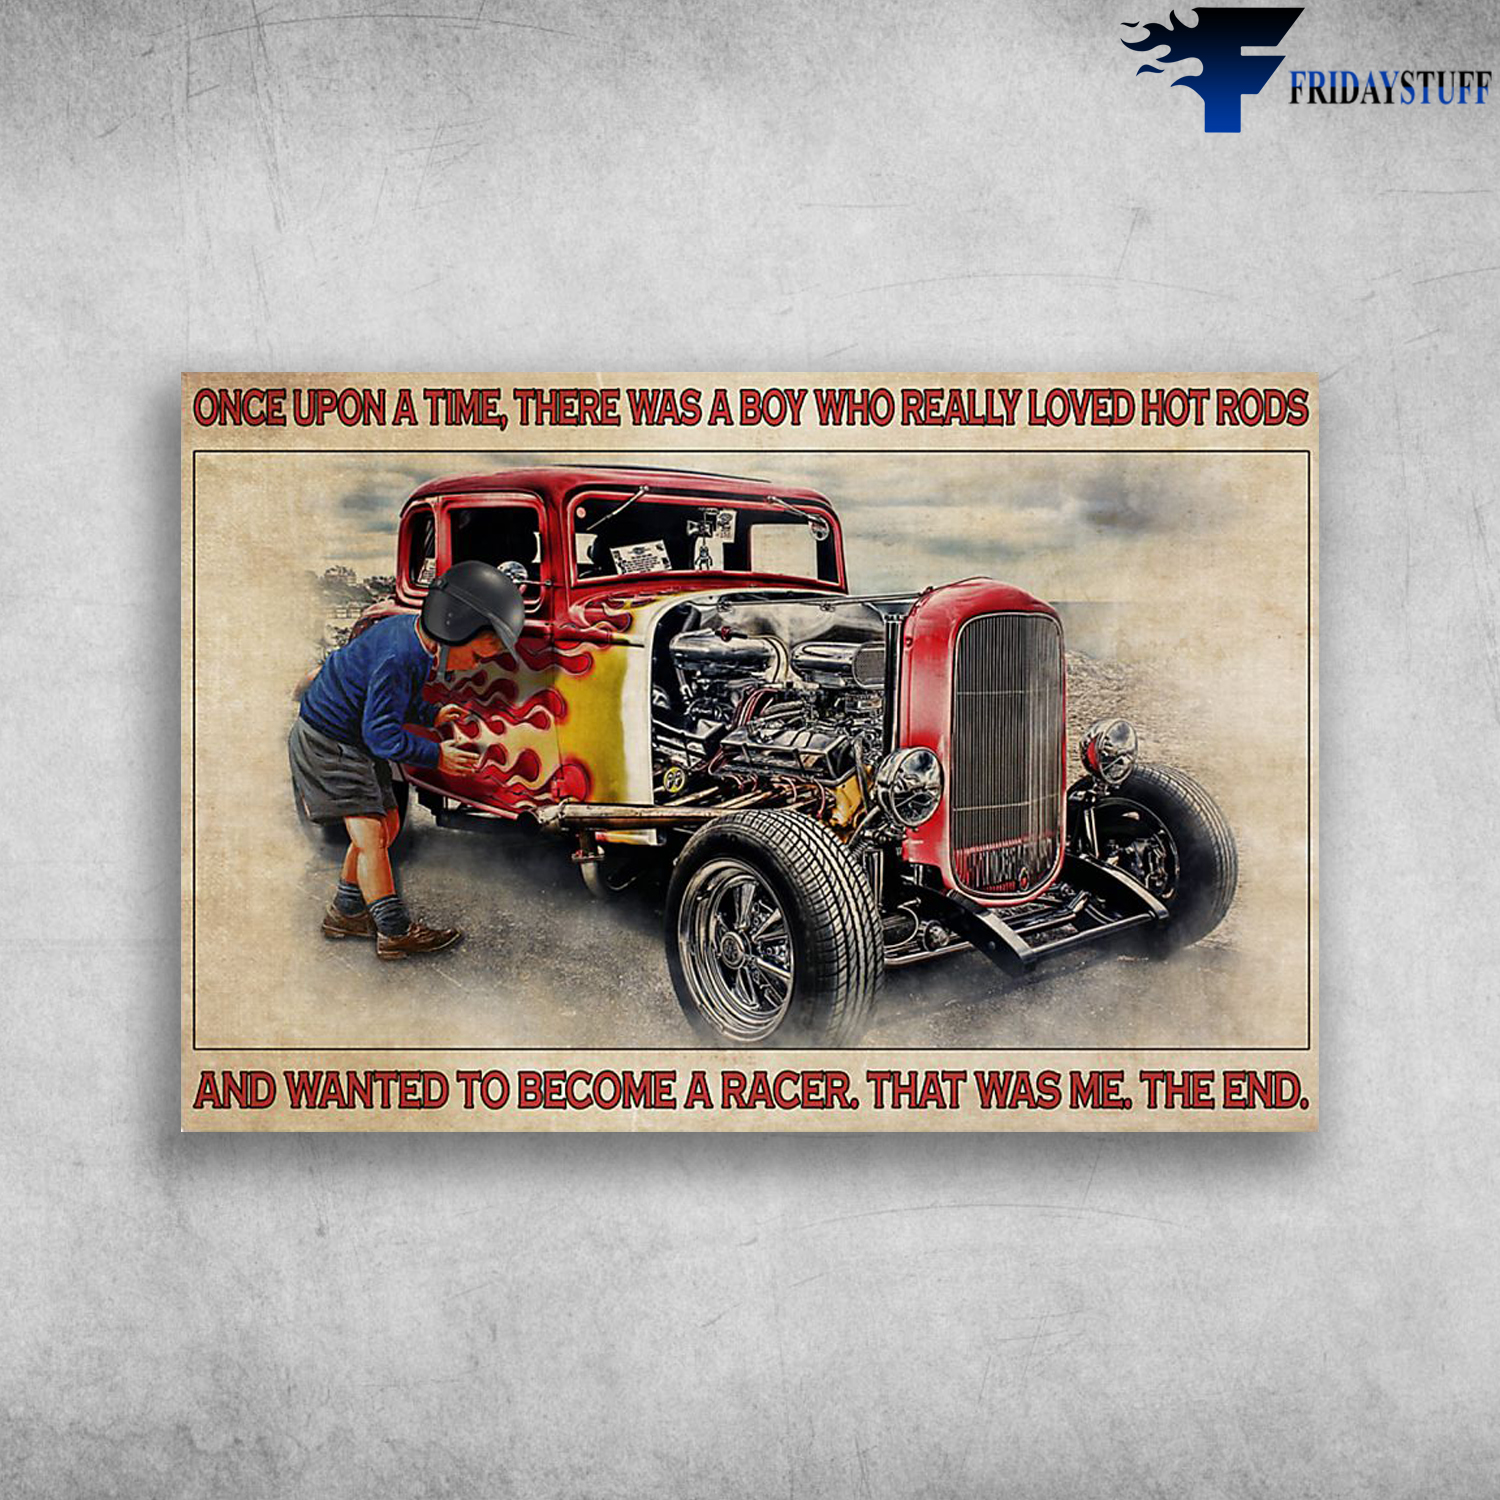 The Boy Stands Beside The Red Hot Rod - Once Upon A Time, There Was A Boy Who Really Love Hot Rods